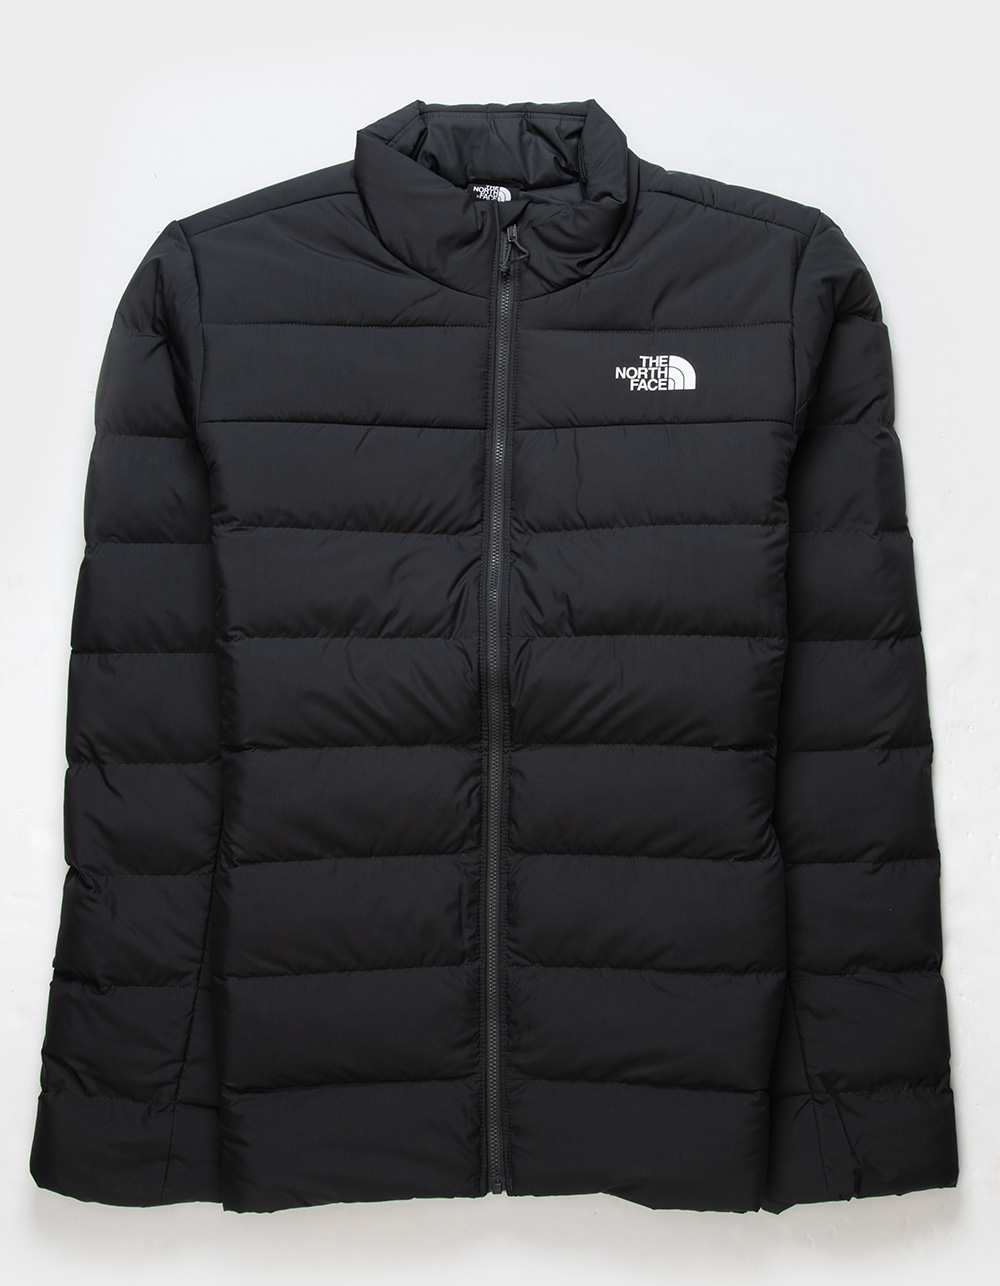 THE NORTH FACE Aconcagua 3 Mens Puffer Jacket - GRAY | Tillys